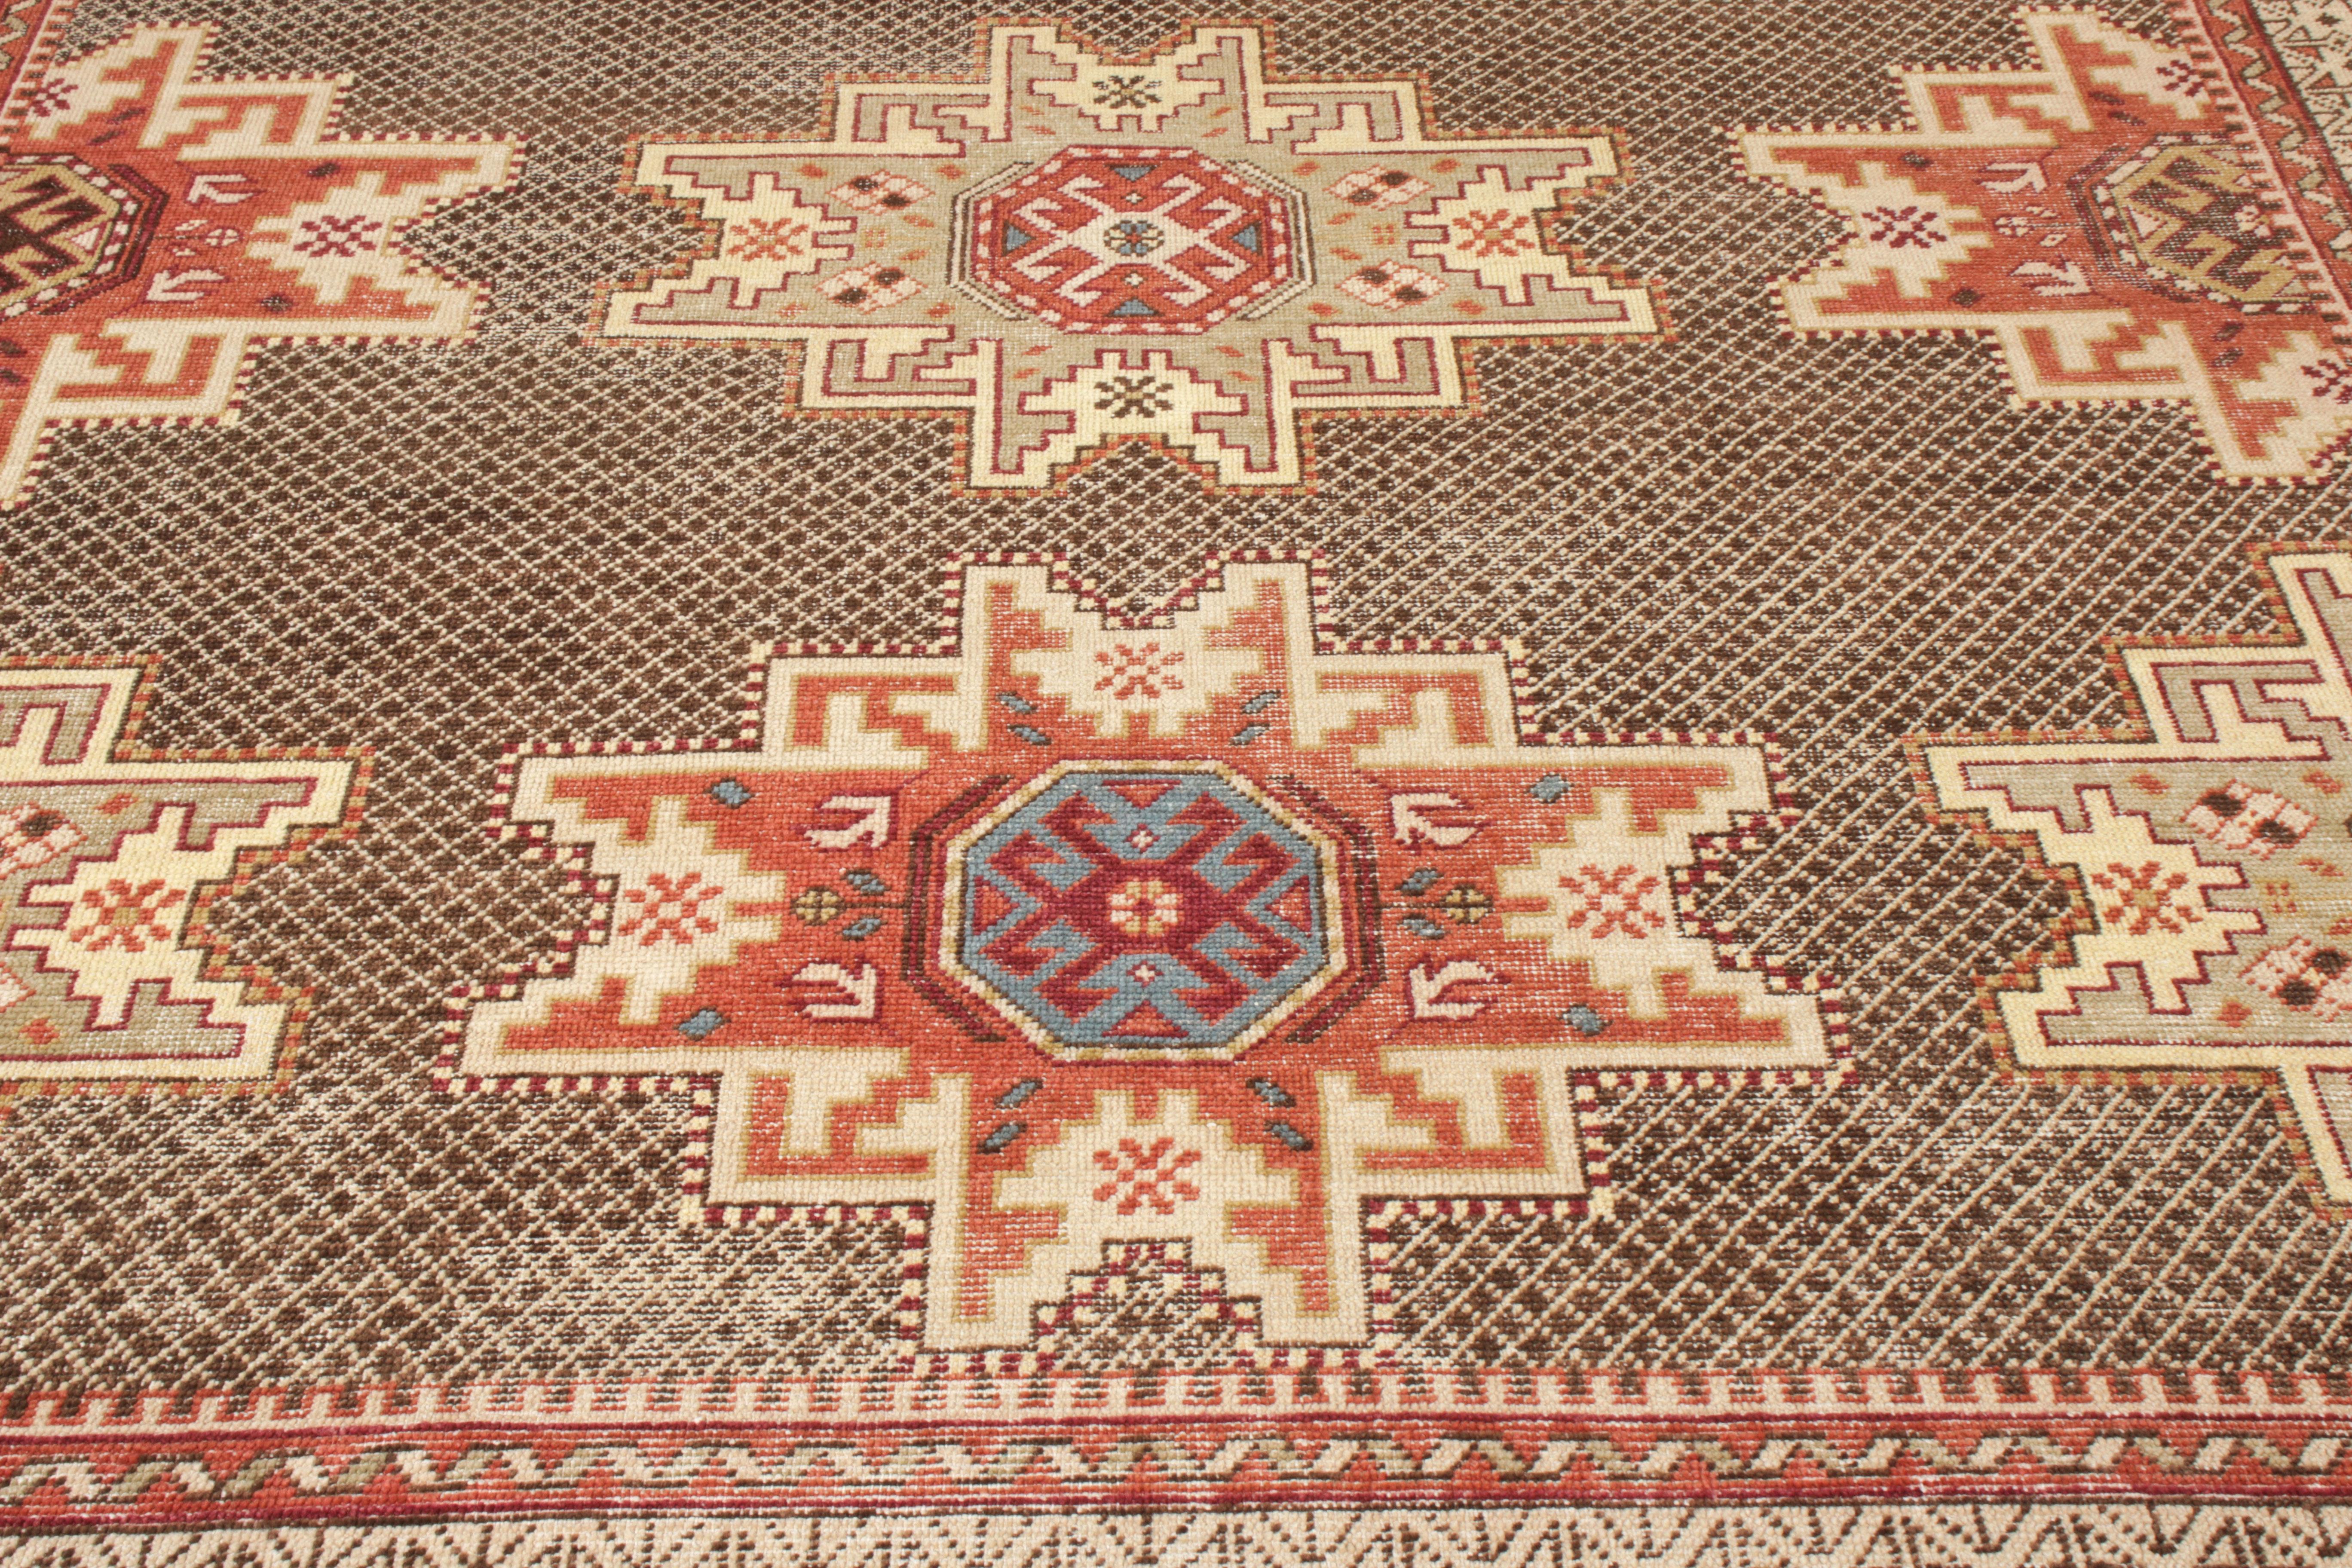 Indian Rug & Kilim’s Distressed Kuba Style Rug in Red, Beige-Brown Medallion Pattern For Sale